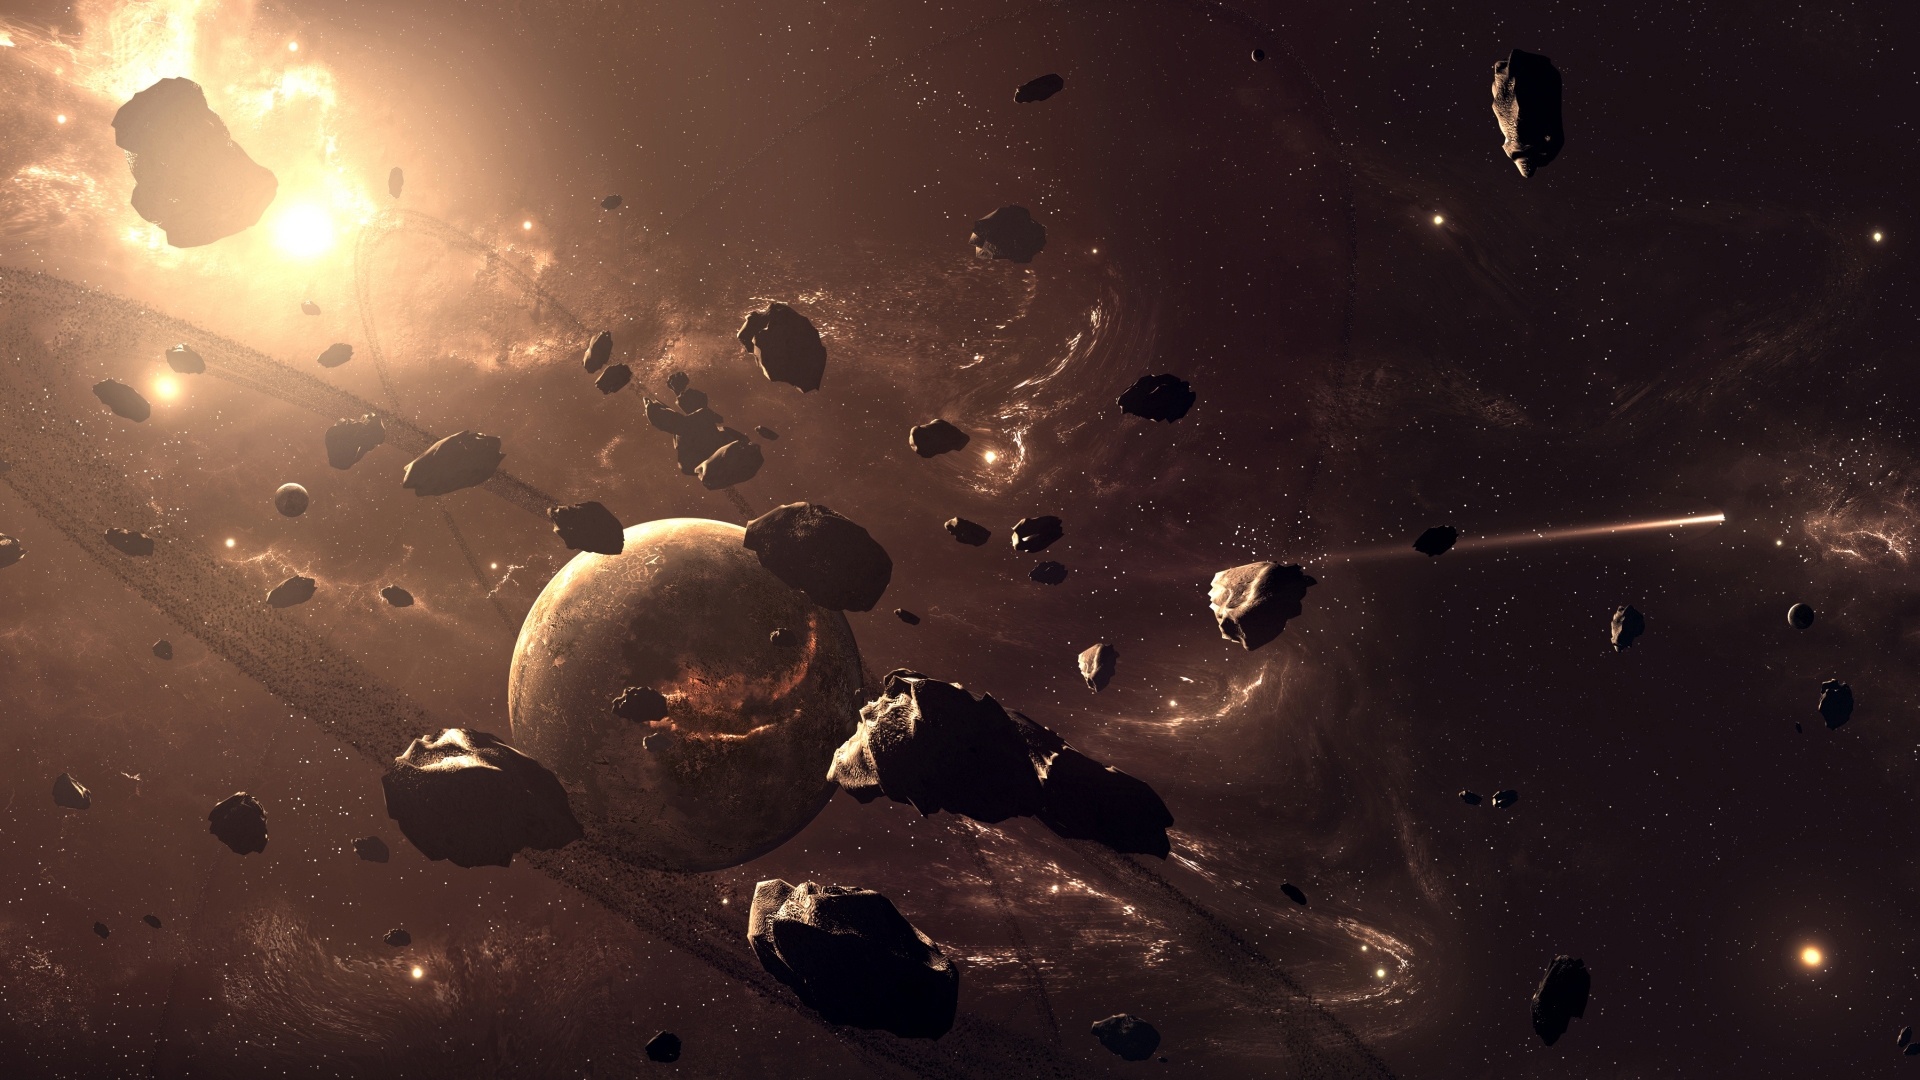 sztuka - tapety3d - planet_and_asteroids-1920x1080